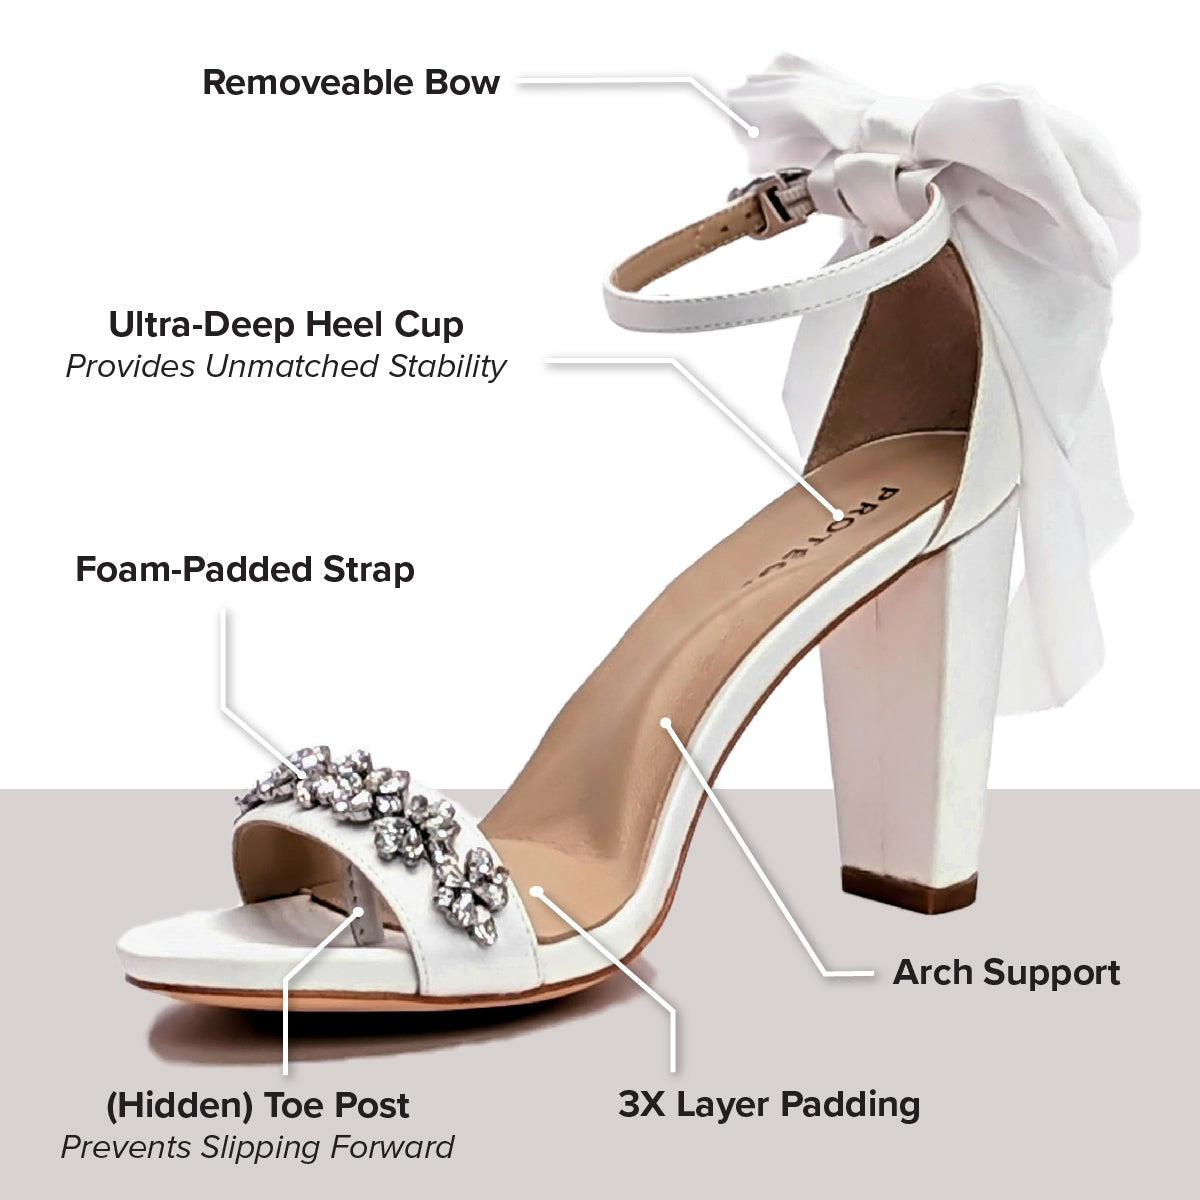 Bridal 101: 5 Tips On Choosing Your Bridal Shoes - Front Roe by Louise Roe